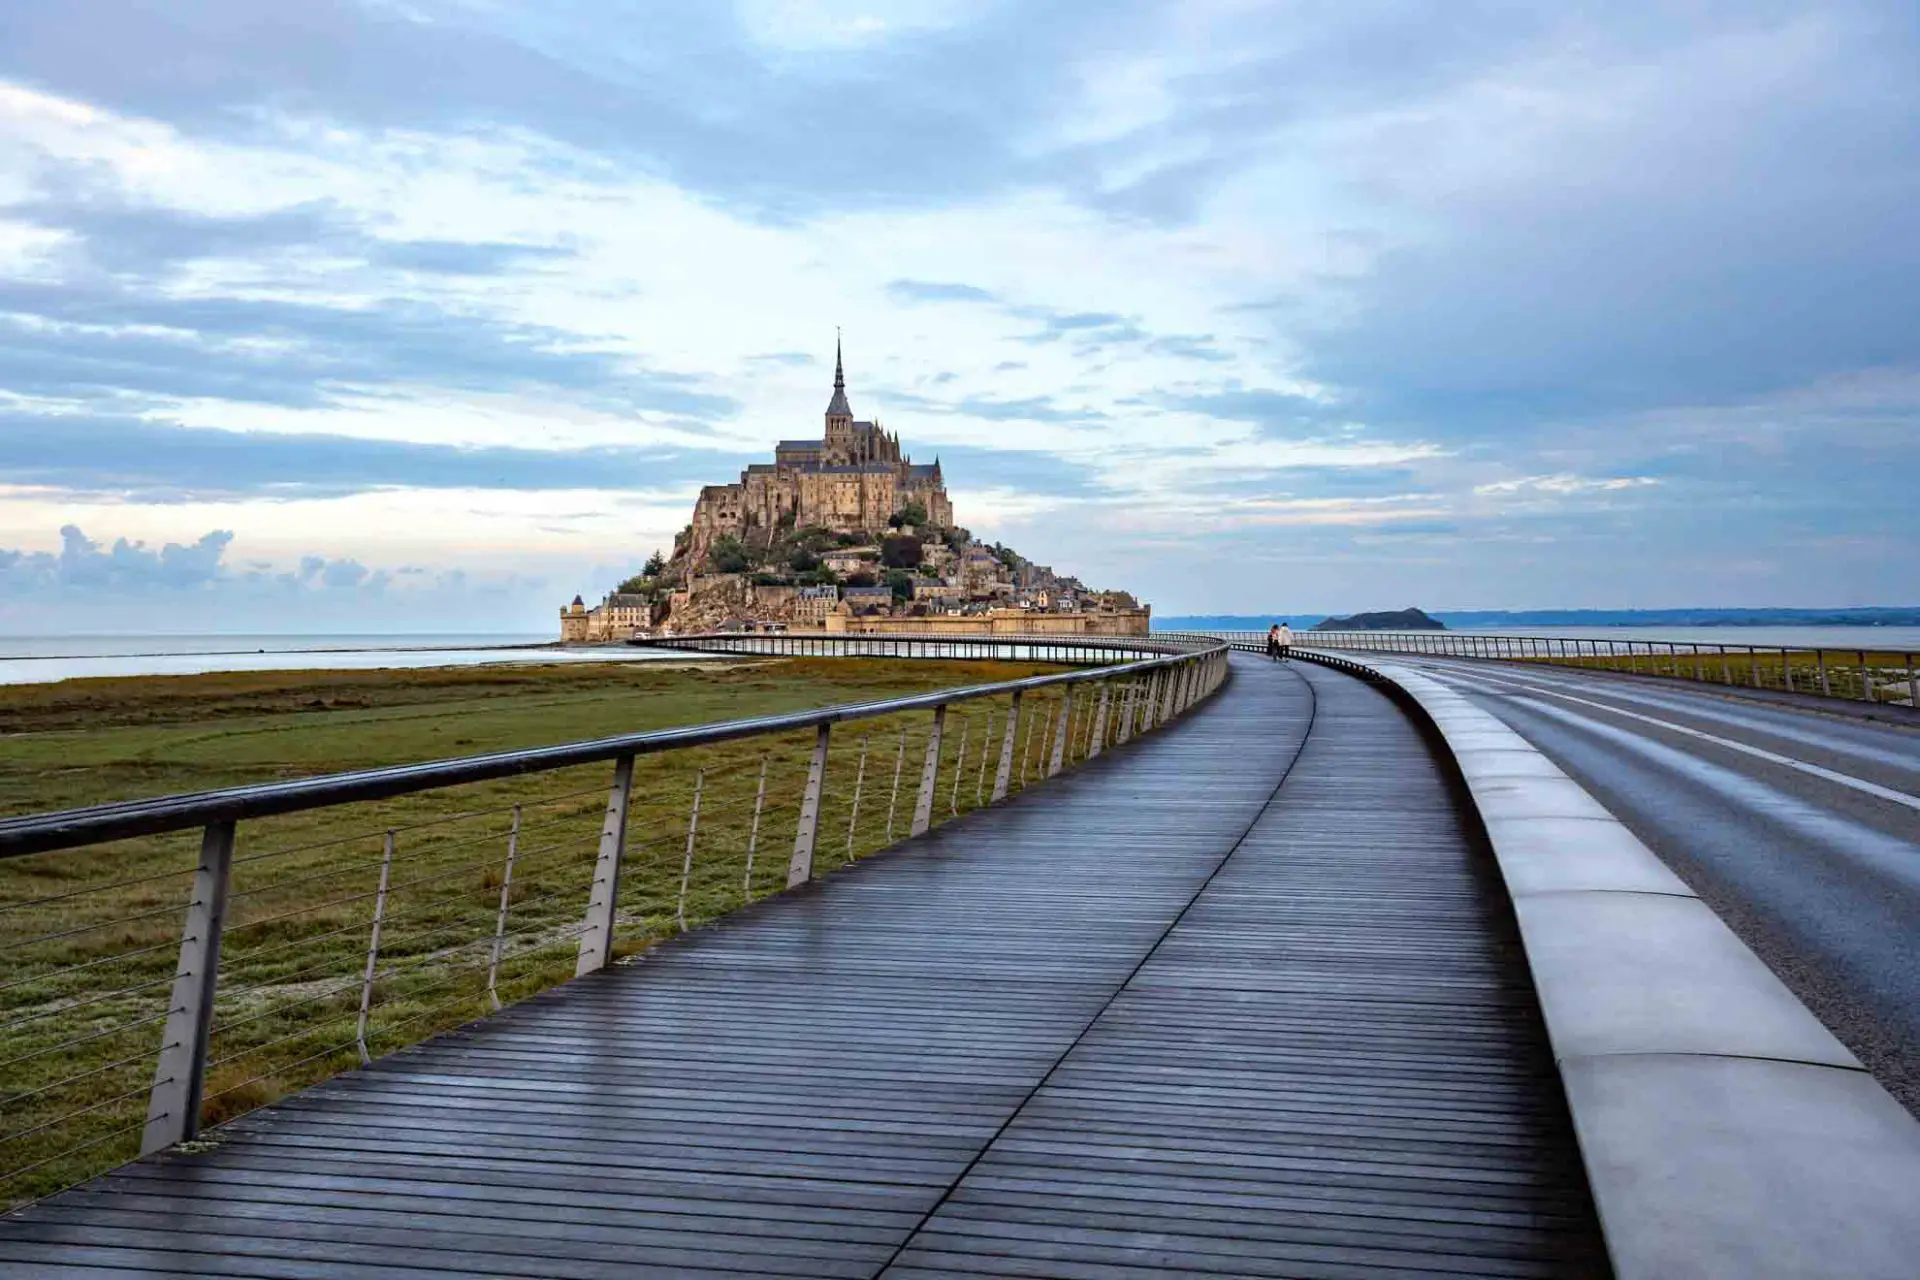 Mont Saint Michel at dawn with causeway, wet with rain, in the foreground